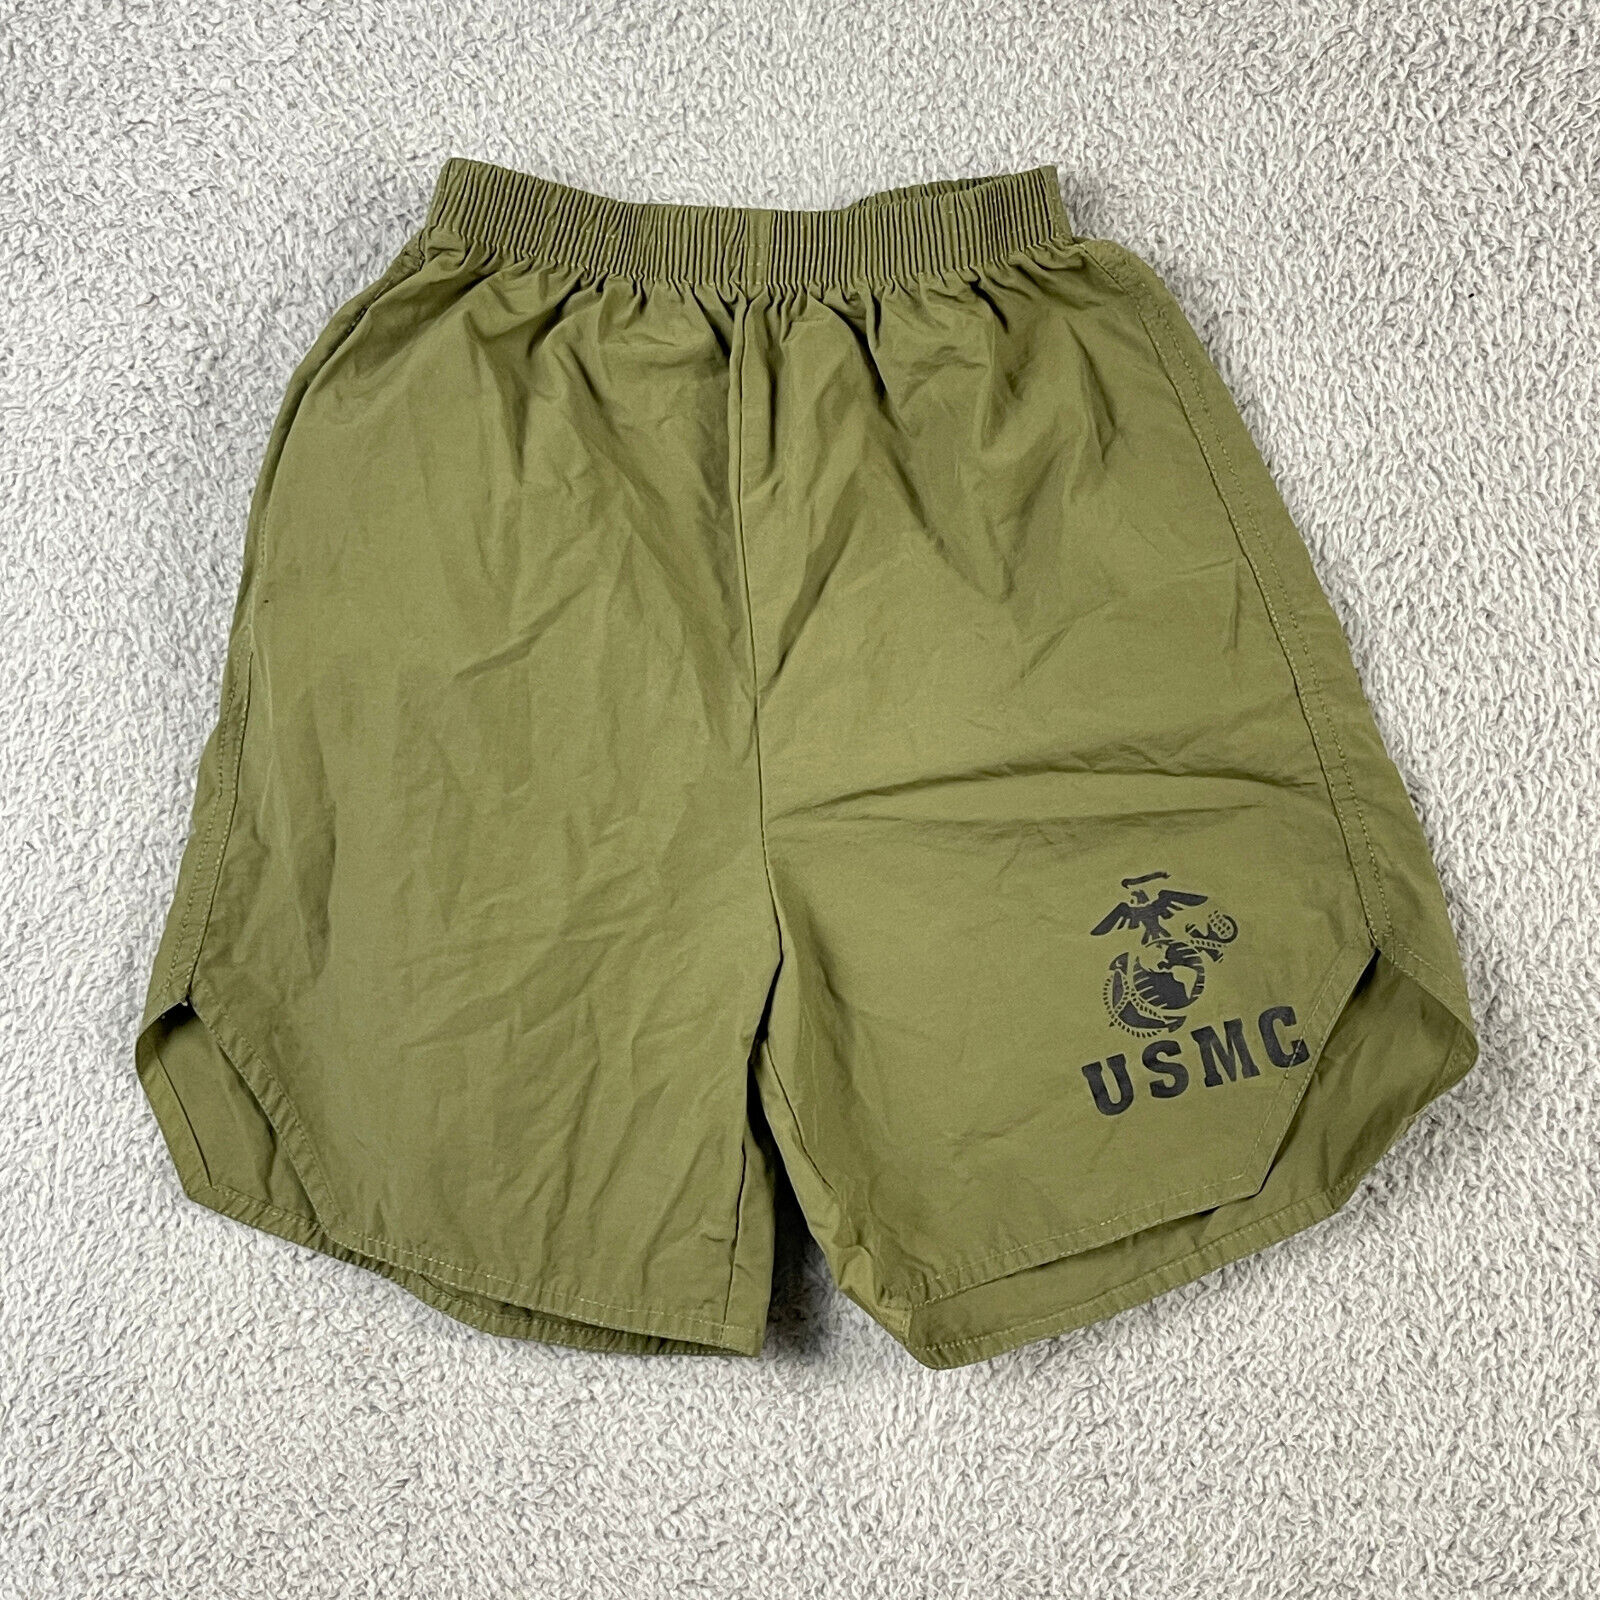 USMC Green Running Shorts Boys Youth Size Large Official Trooper Green